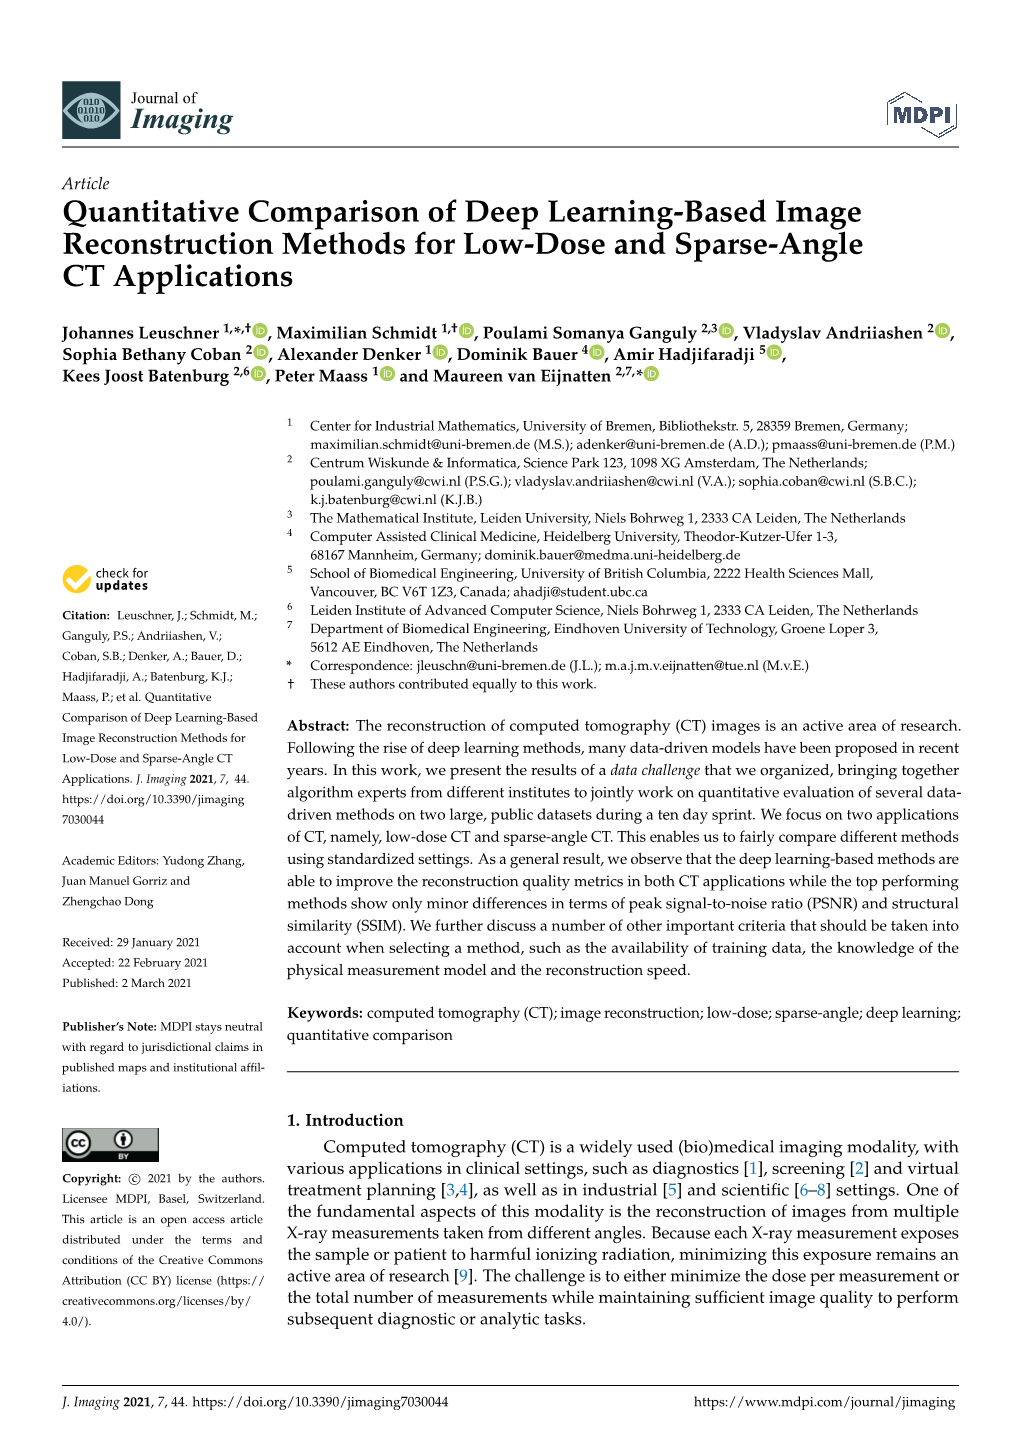 Quantitative Comparison of Deep Learning-Based Image Reconstruction Methods for Low-Dose and Sparse-Angle CT Applications